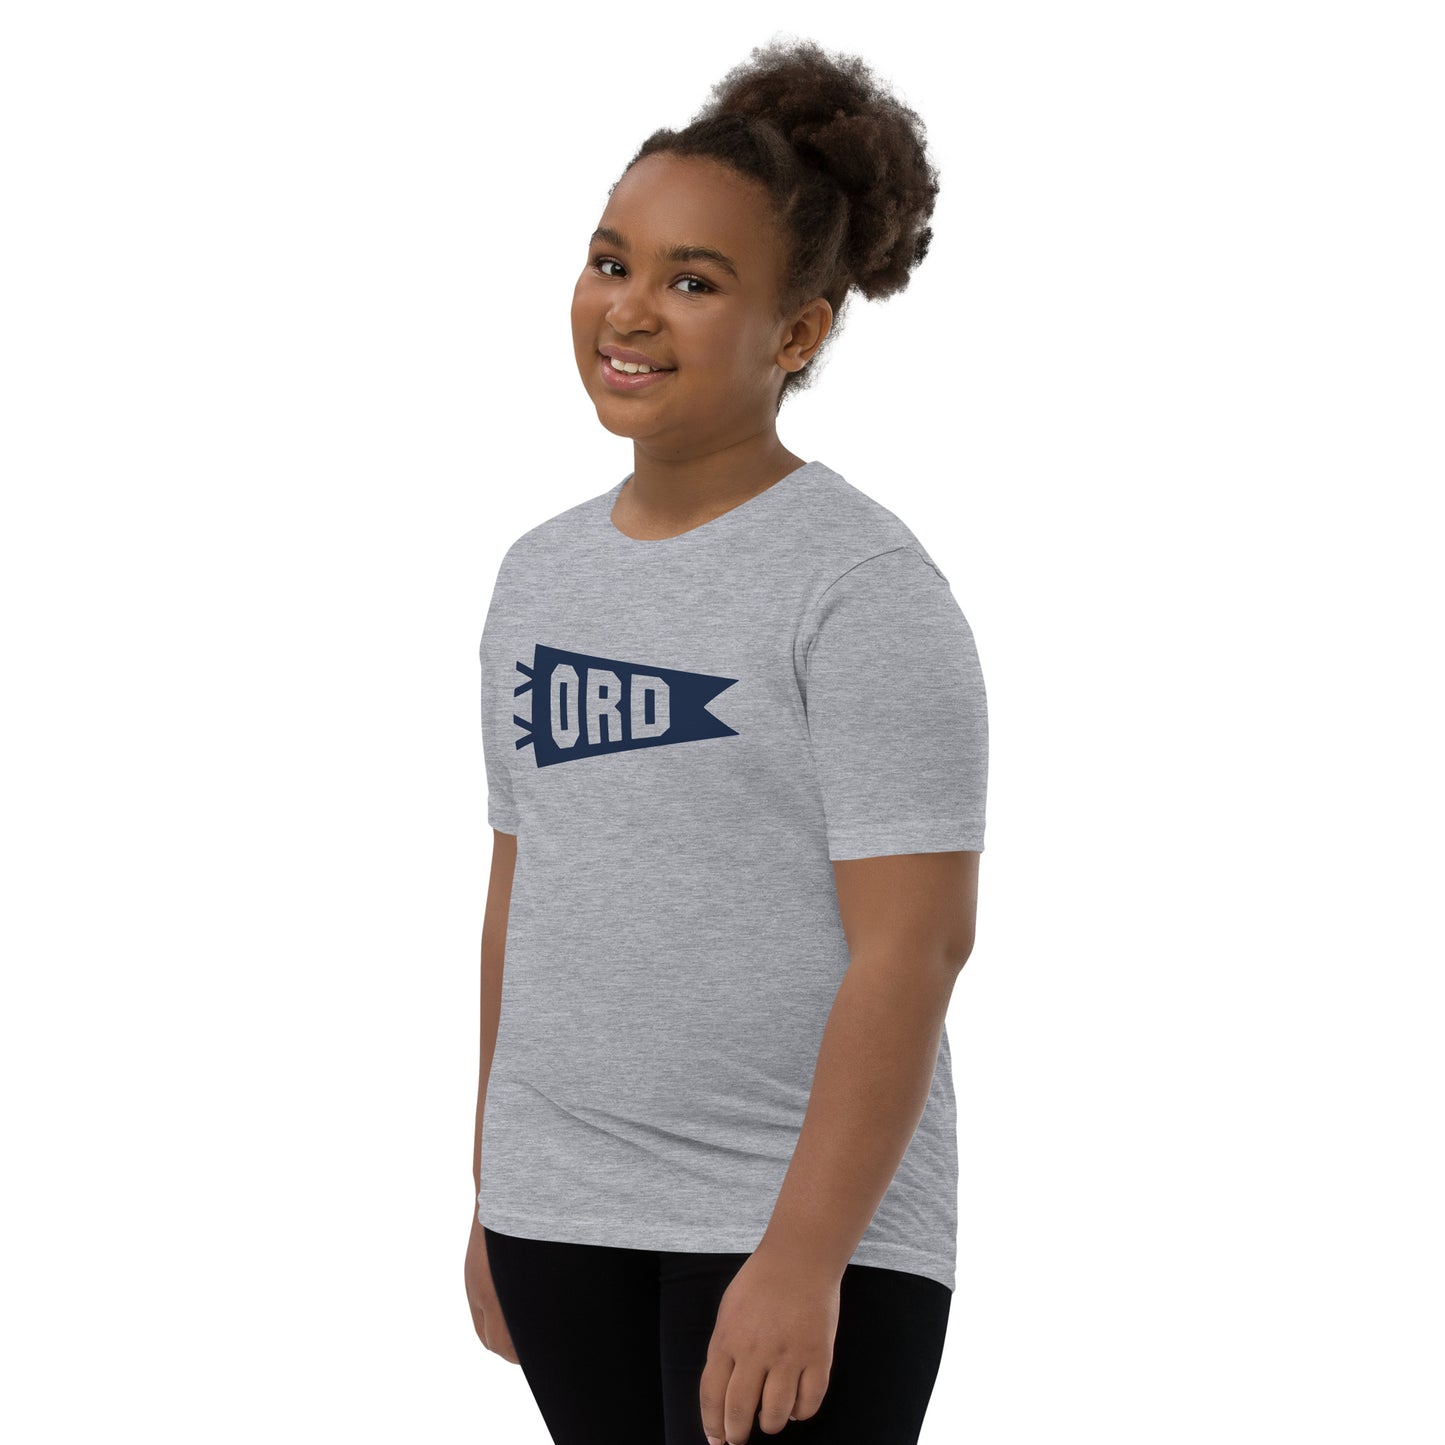 Kid's Airport Code Tee - Navy Blue Graphic • ORD Chicago • YHM Designs - Image 04